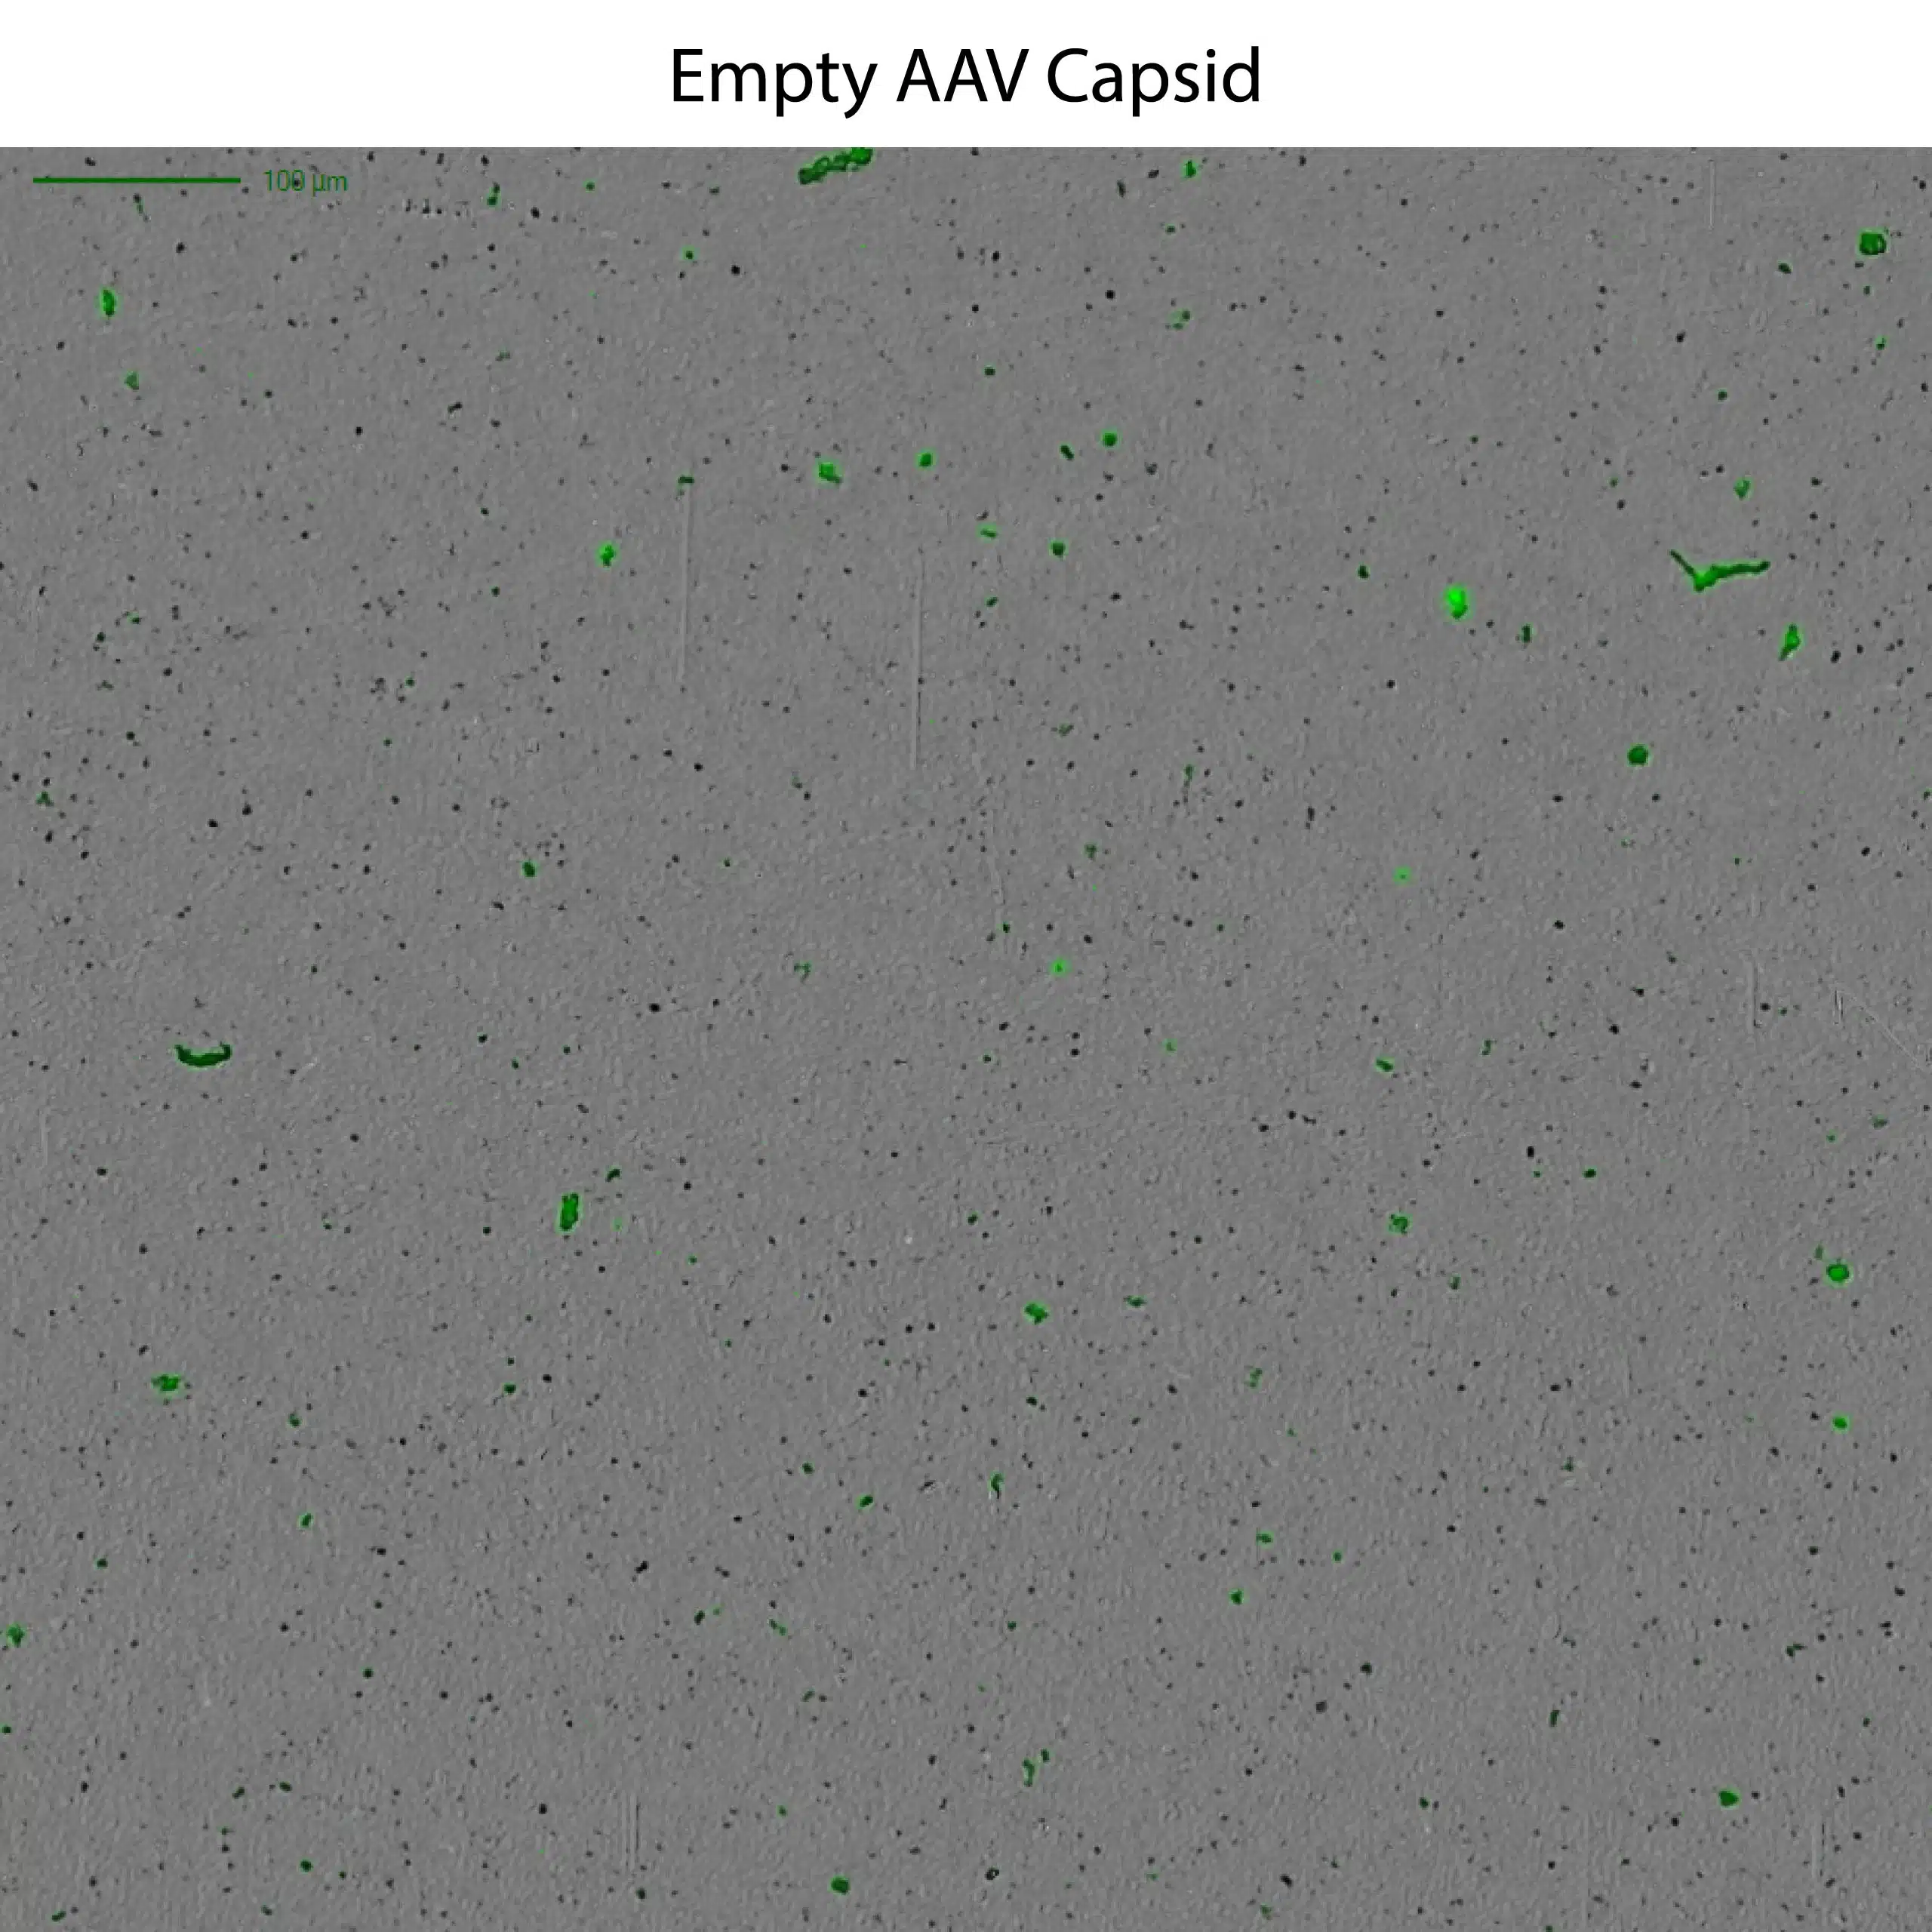 Empty AAV capsids are easily idenfied using the Aura GT system.